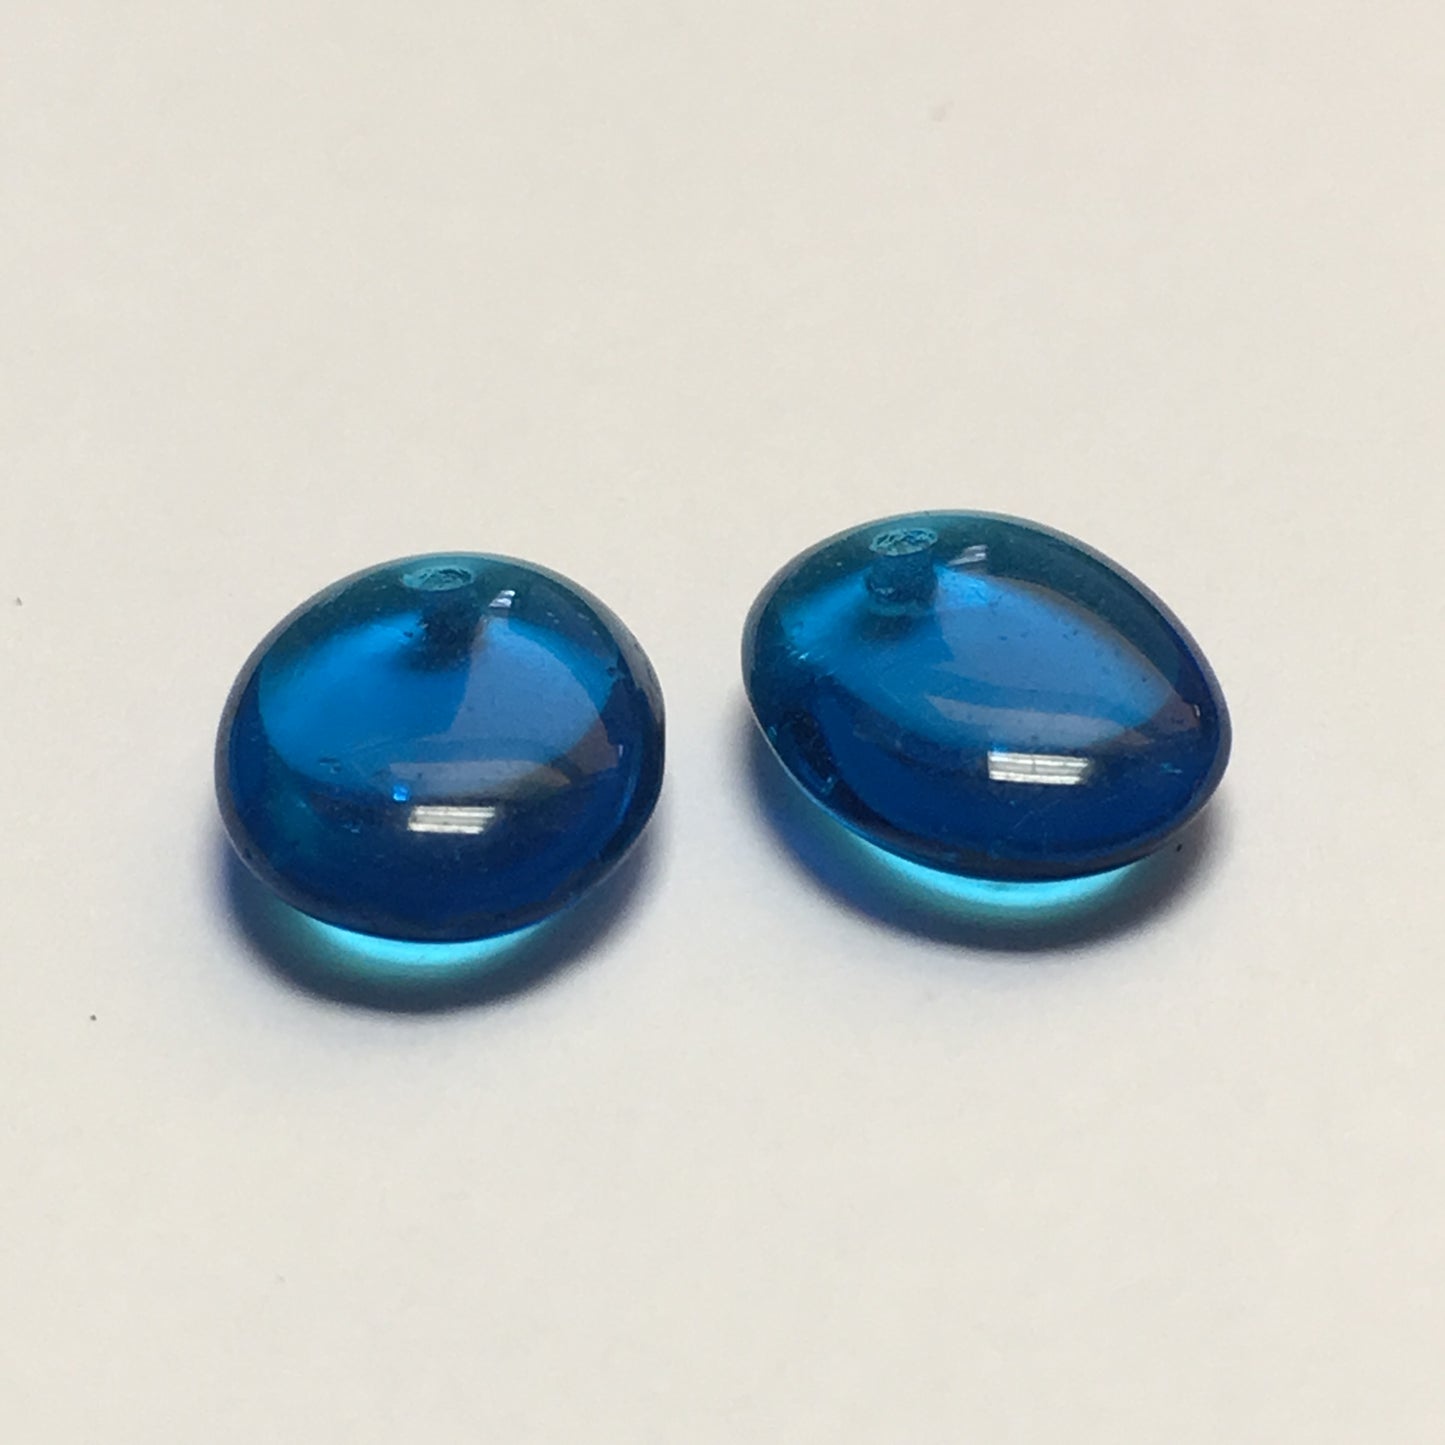 Sapphire Blue Glass Flat Oval Top Drilled Go Go Beads, 11 x 8 x 3 mm, 2 Beads,